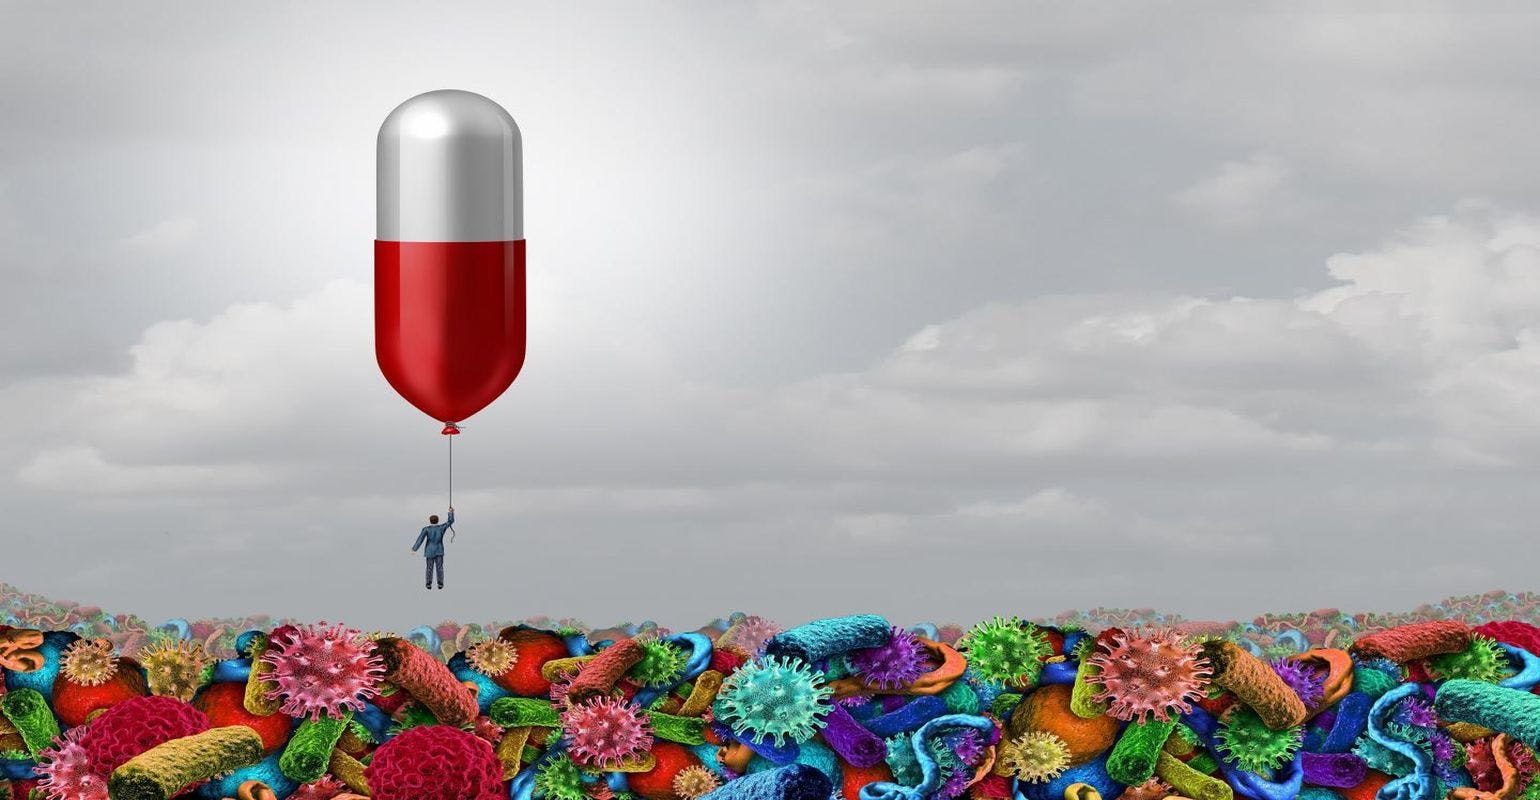 Overuse of Antibiotics is Not What the Doctor Ordered